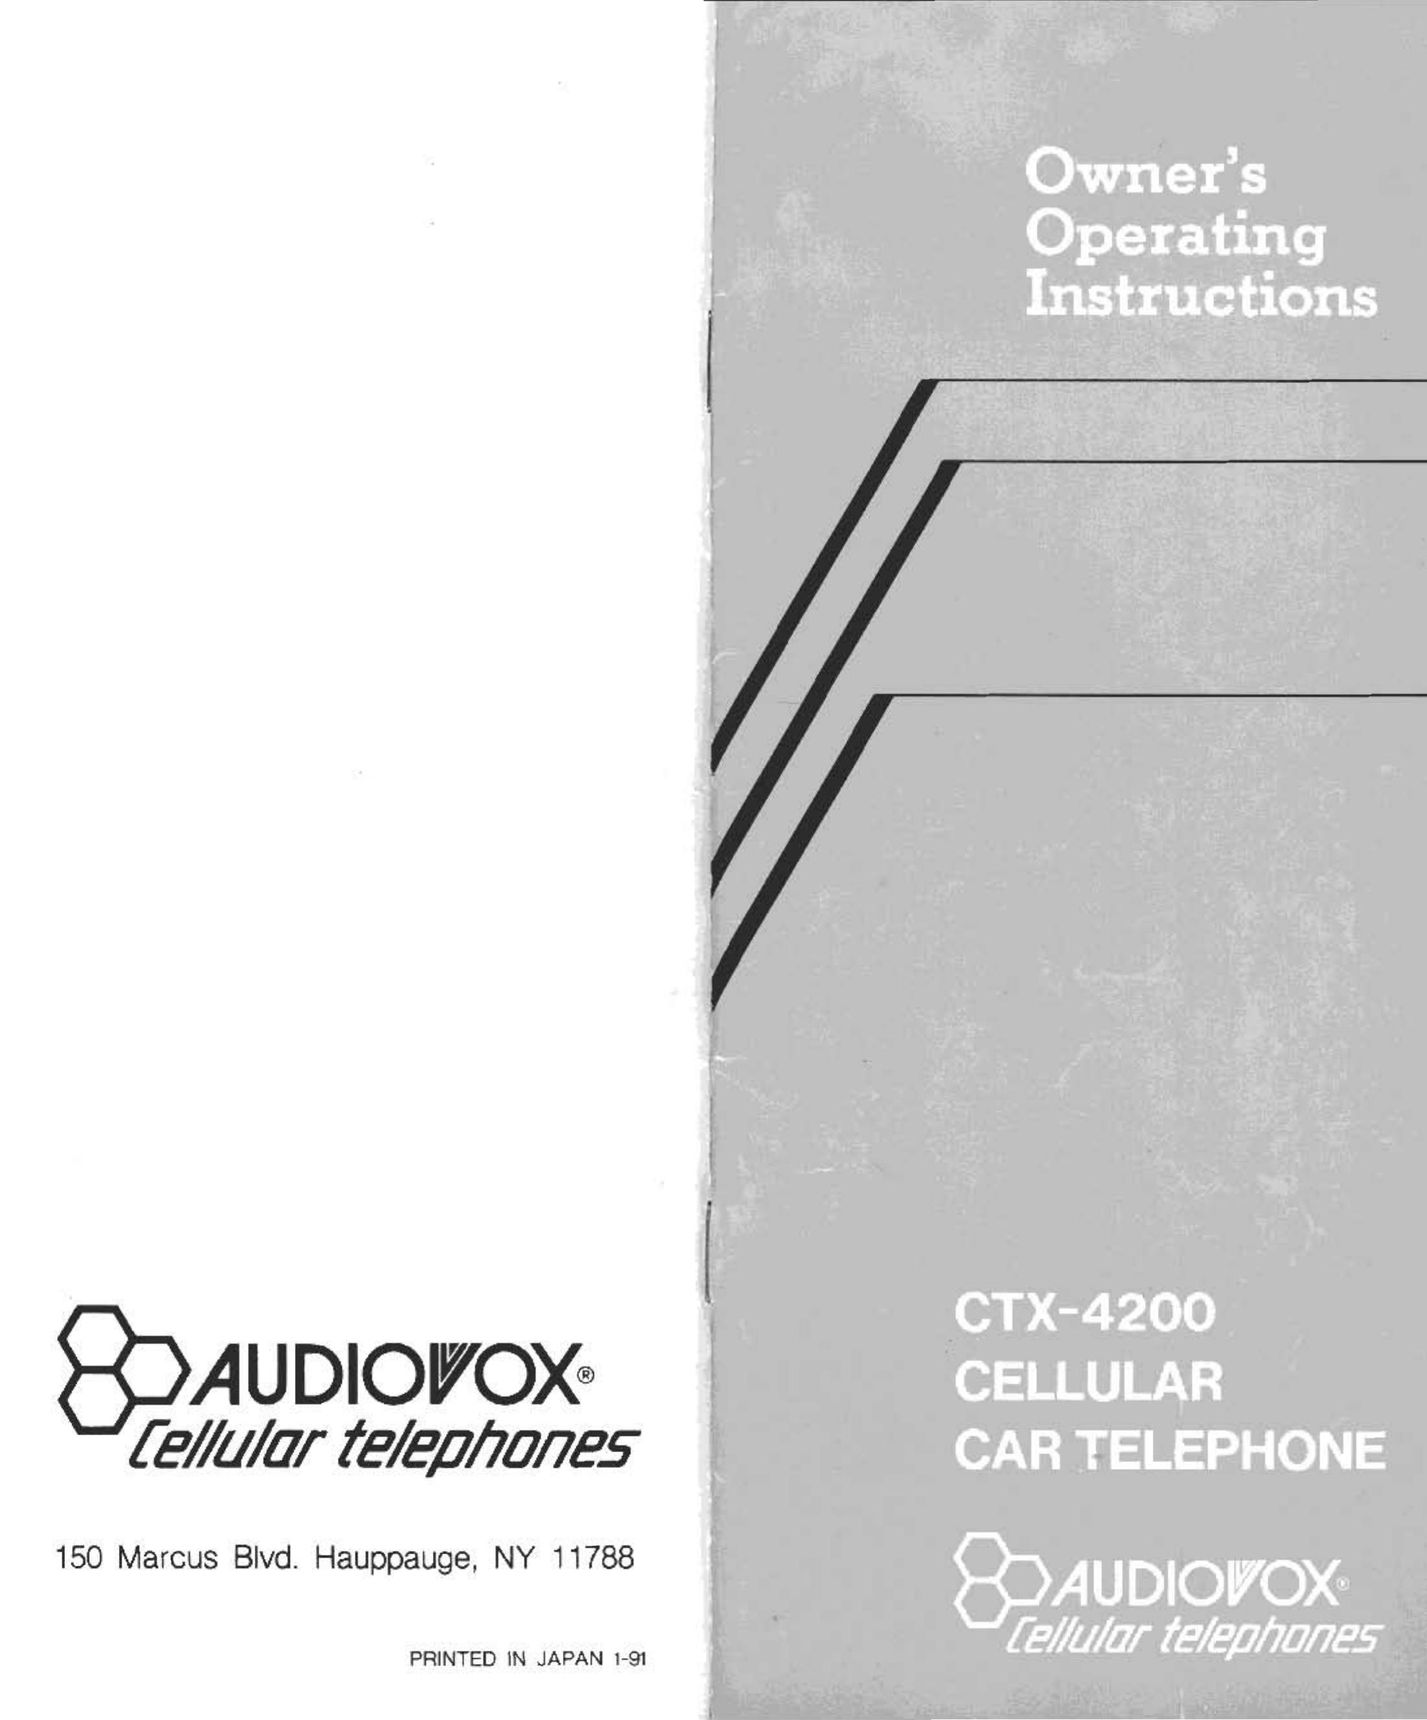 Audiovox CTX-4200 Cell Phone User Manual